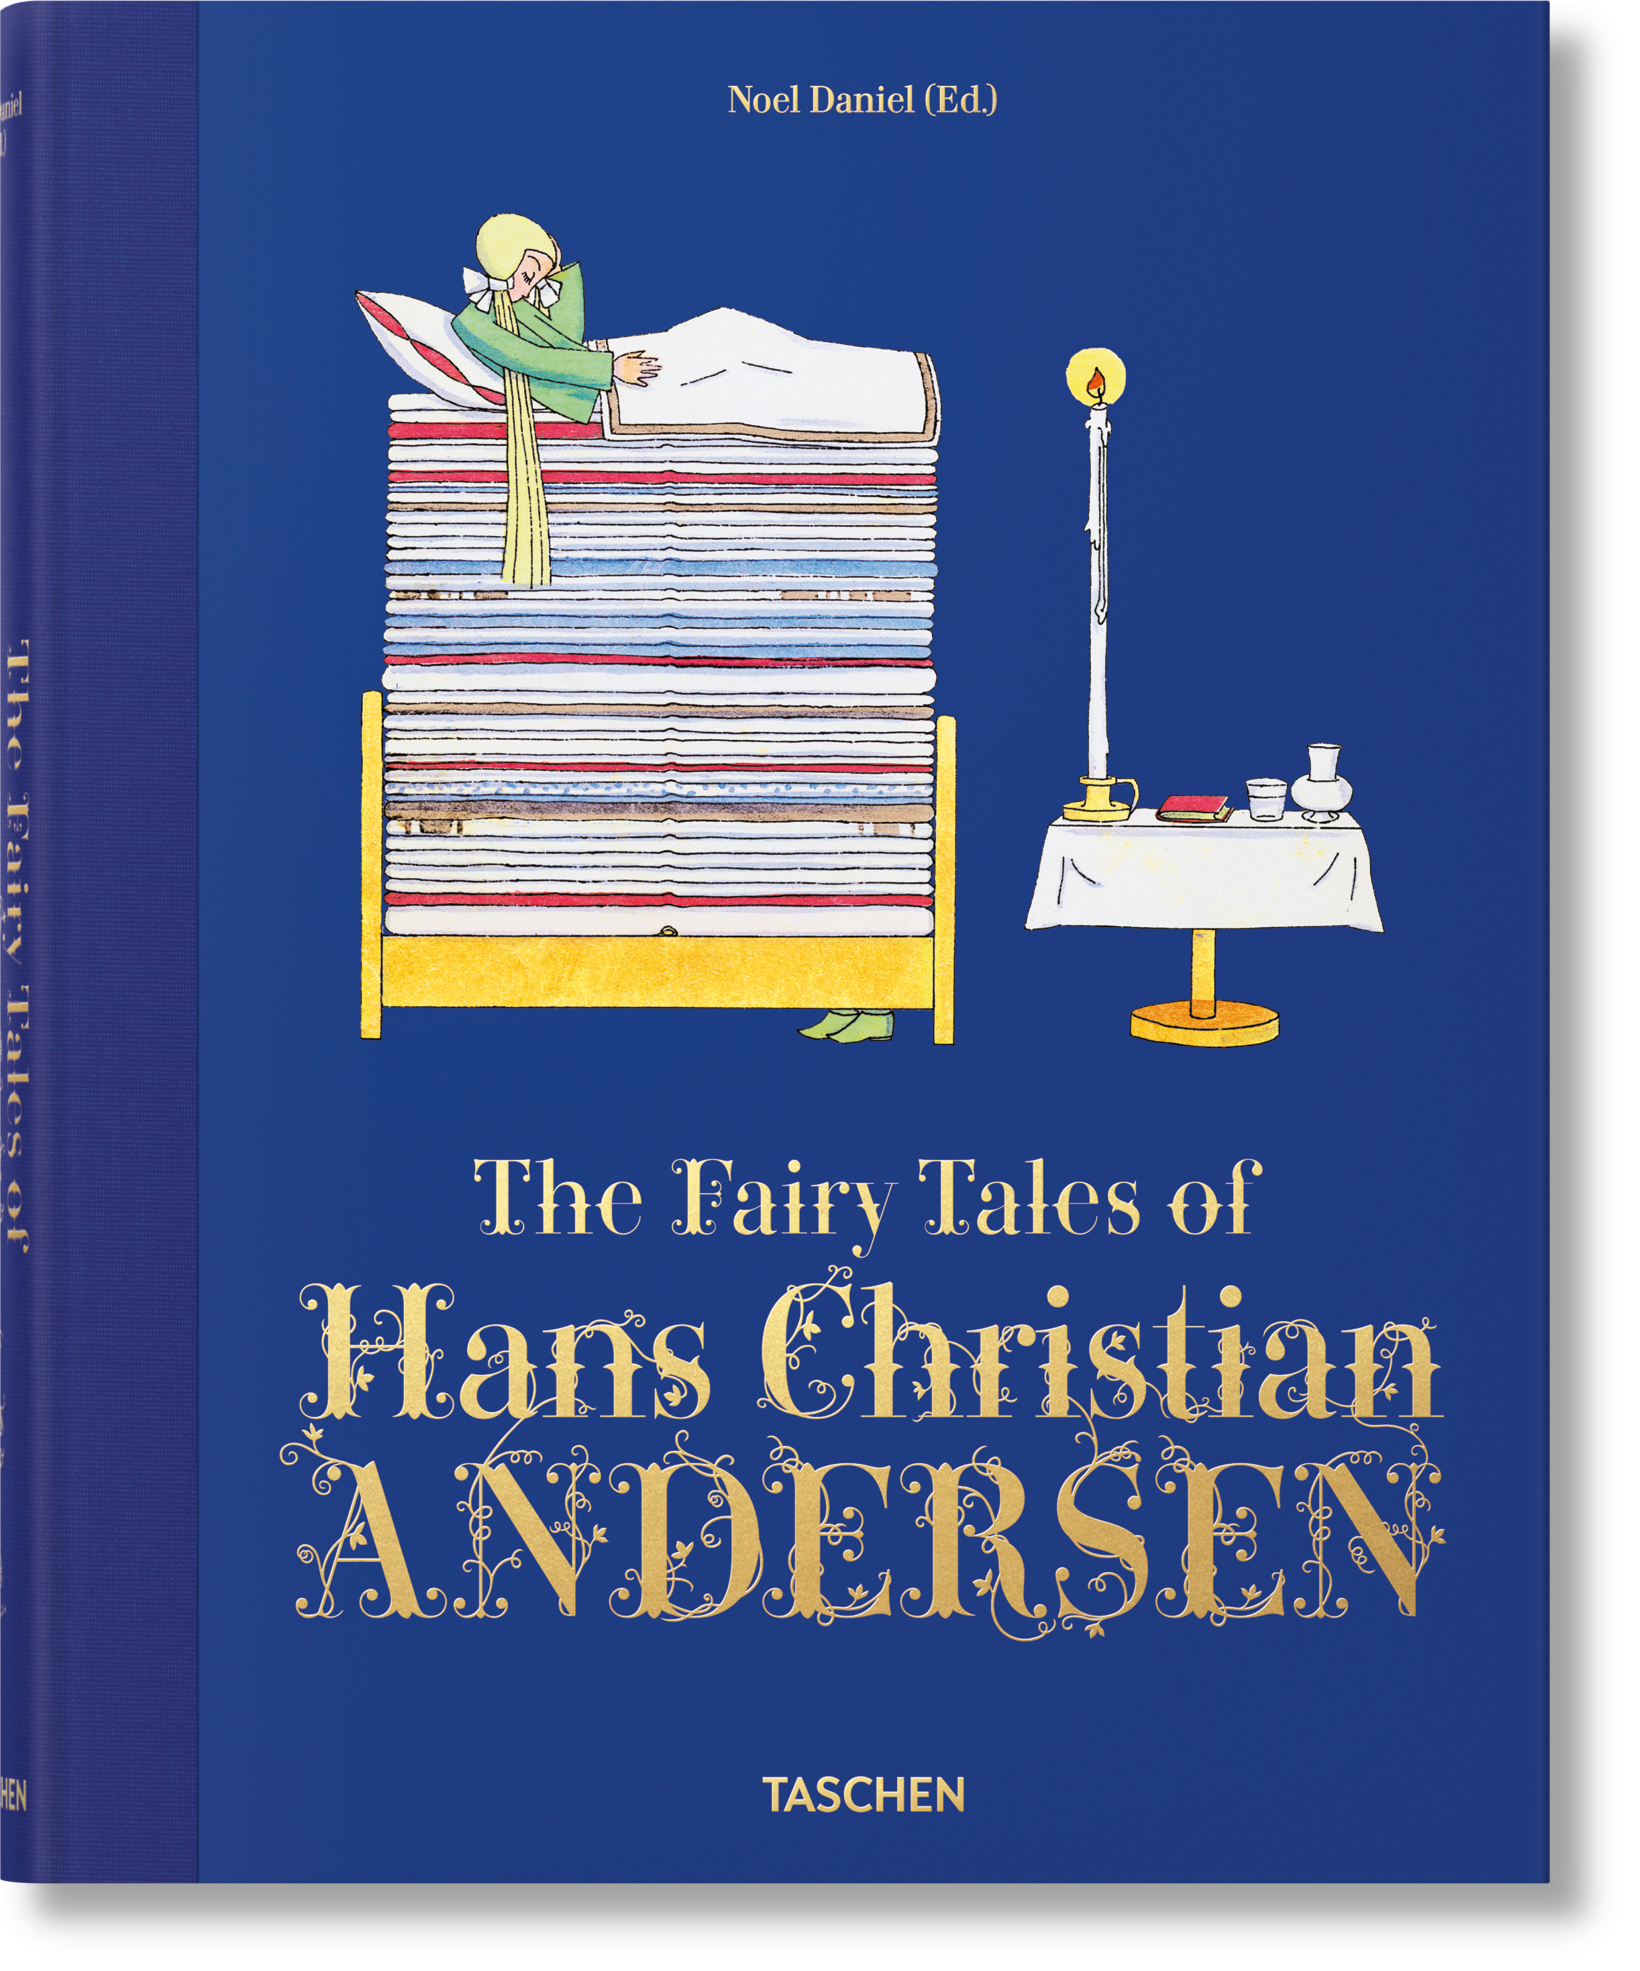 Hans Christian Andersen: The Complete Fairy Tales and Stories